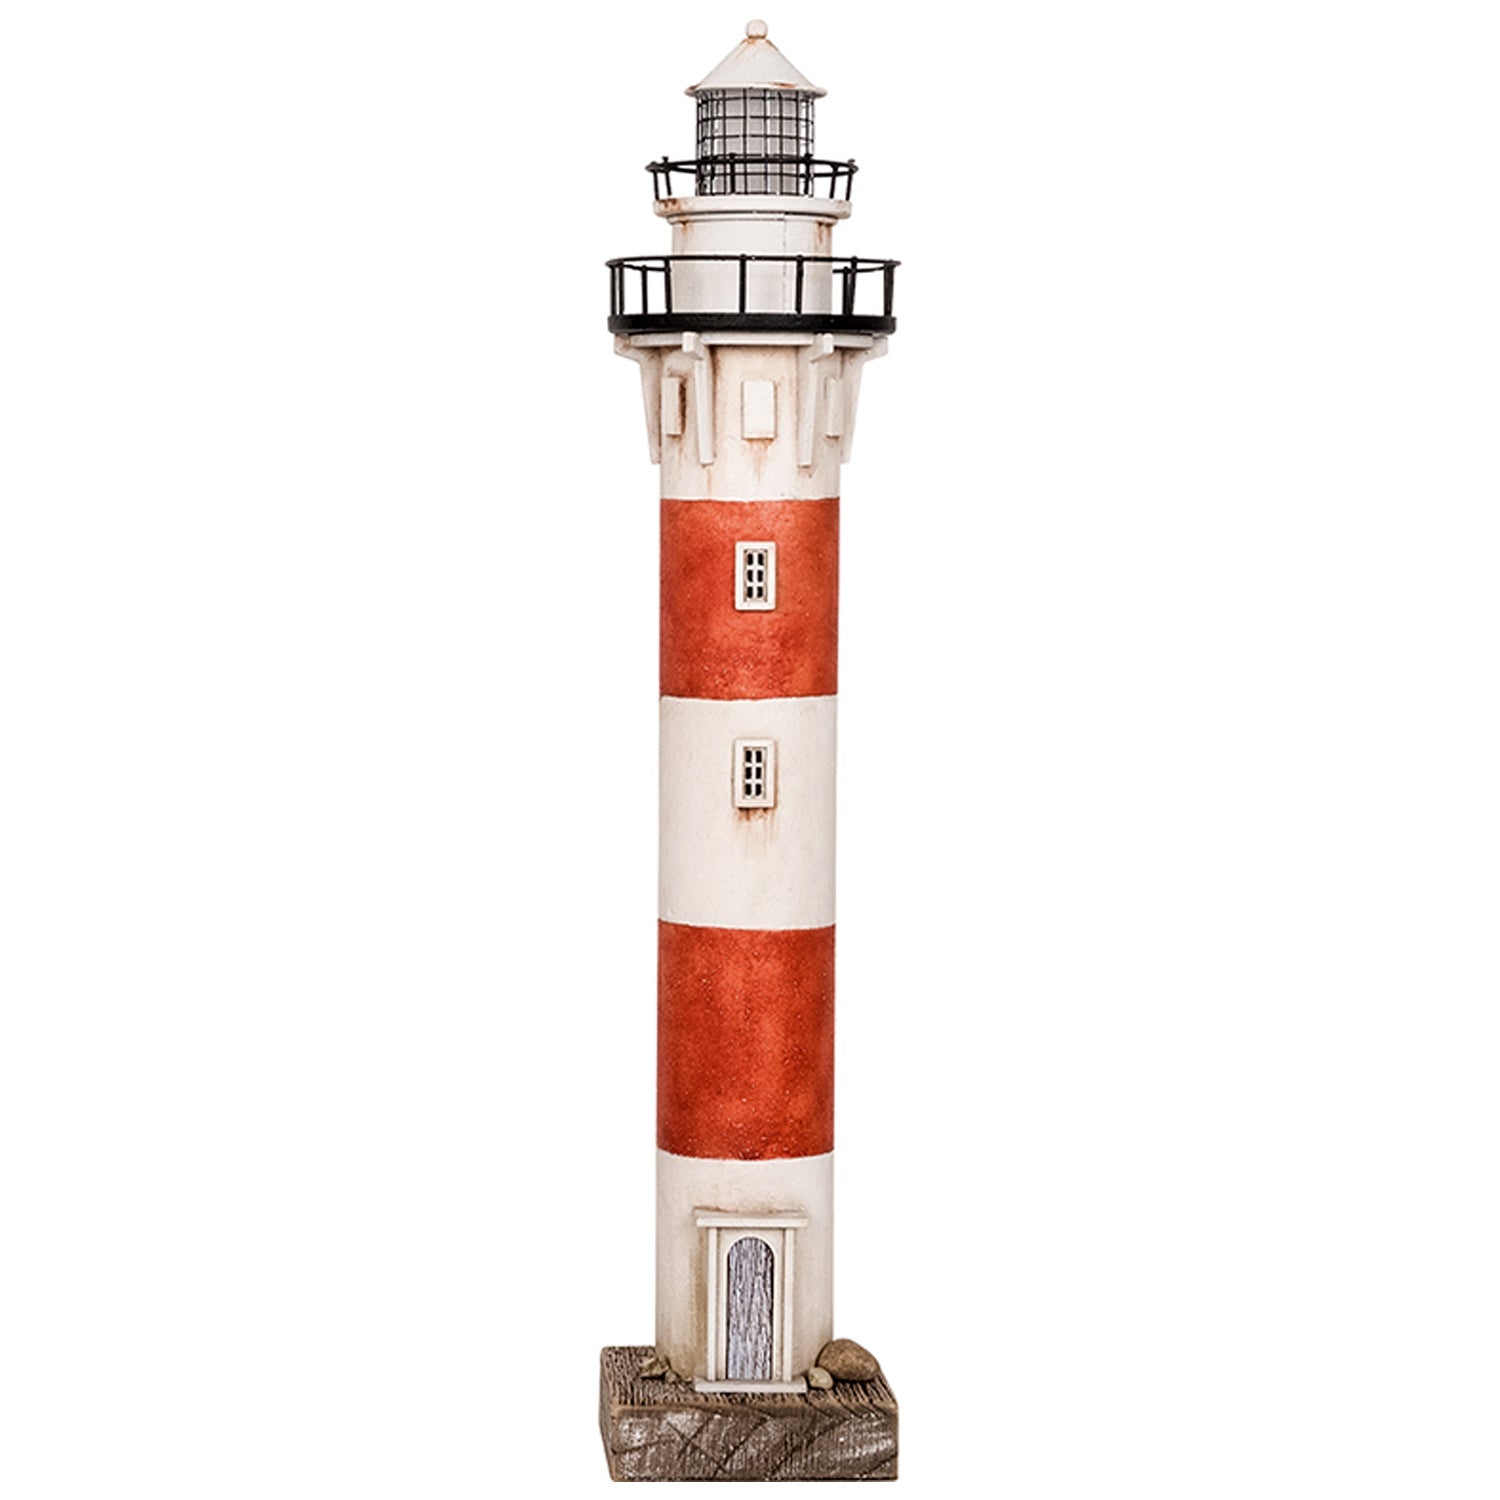 LIGHTHOUSE WITH RED STRIPED LIGHT